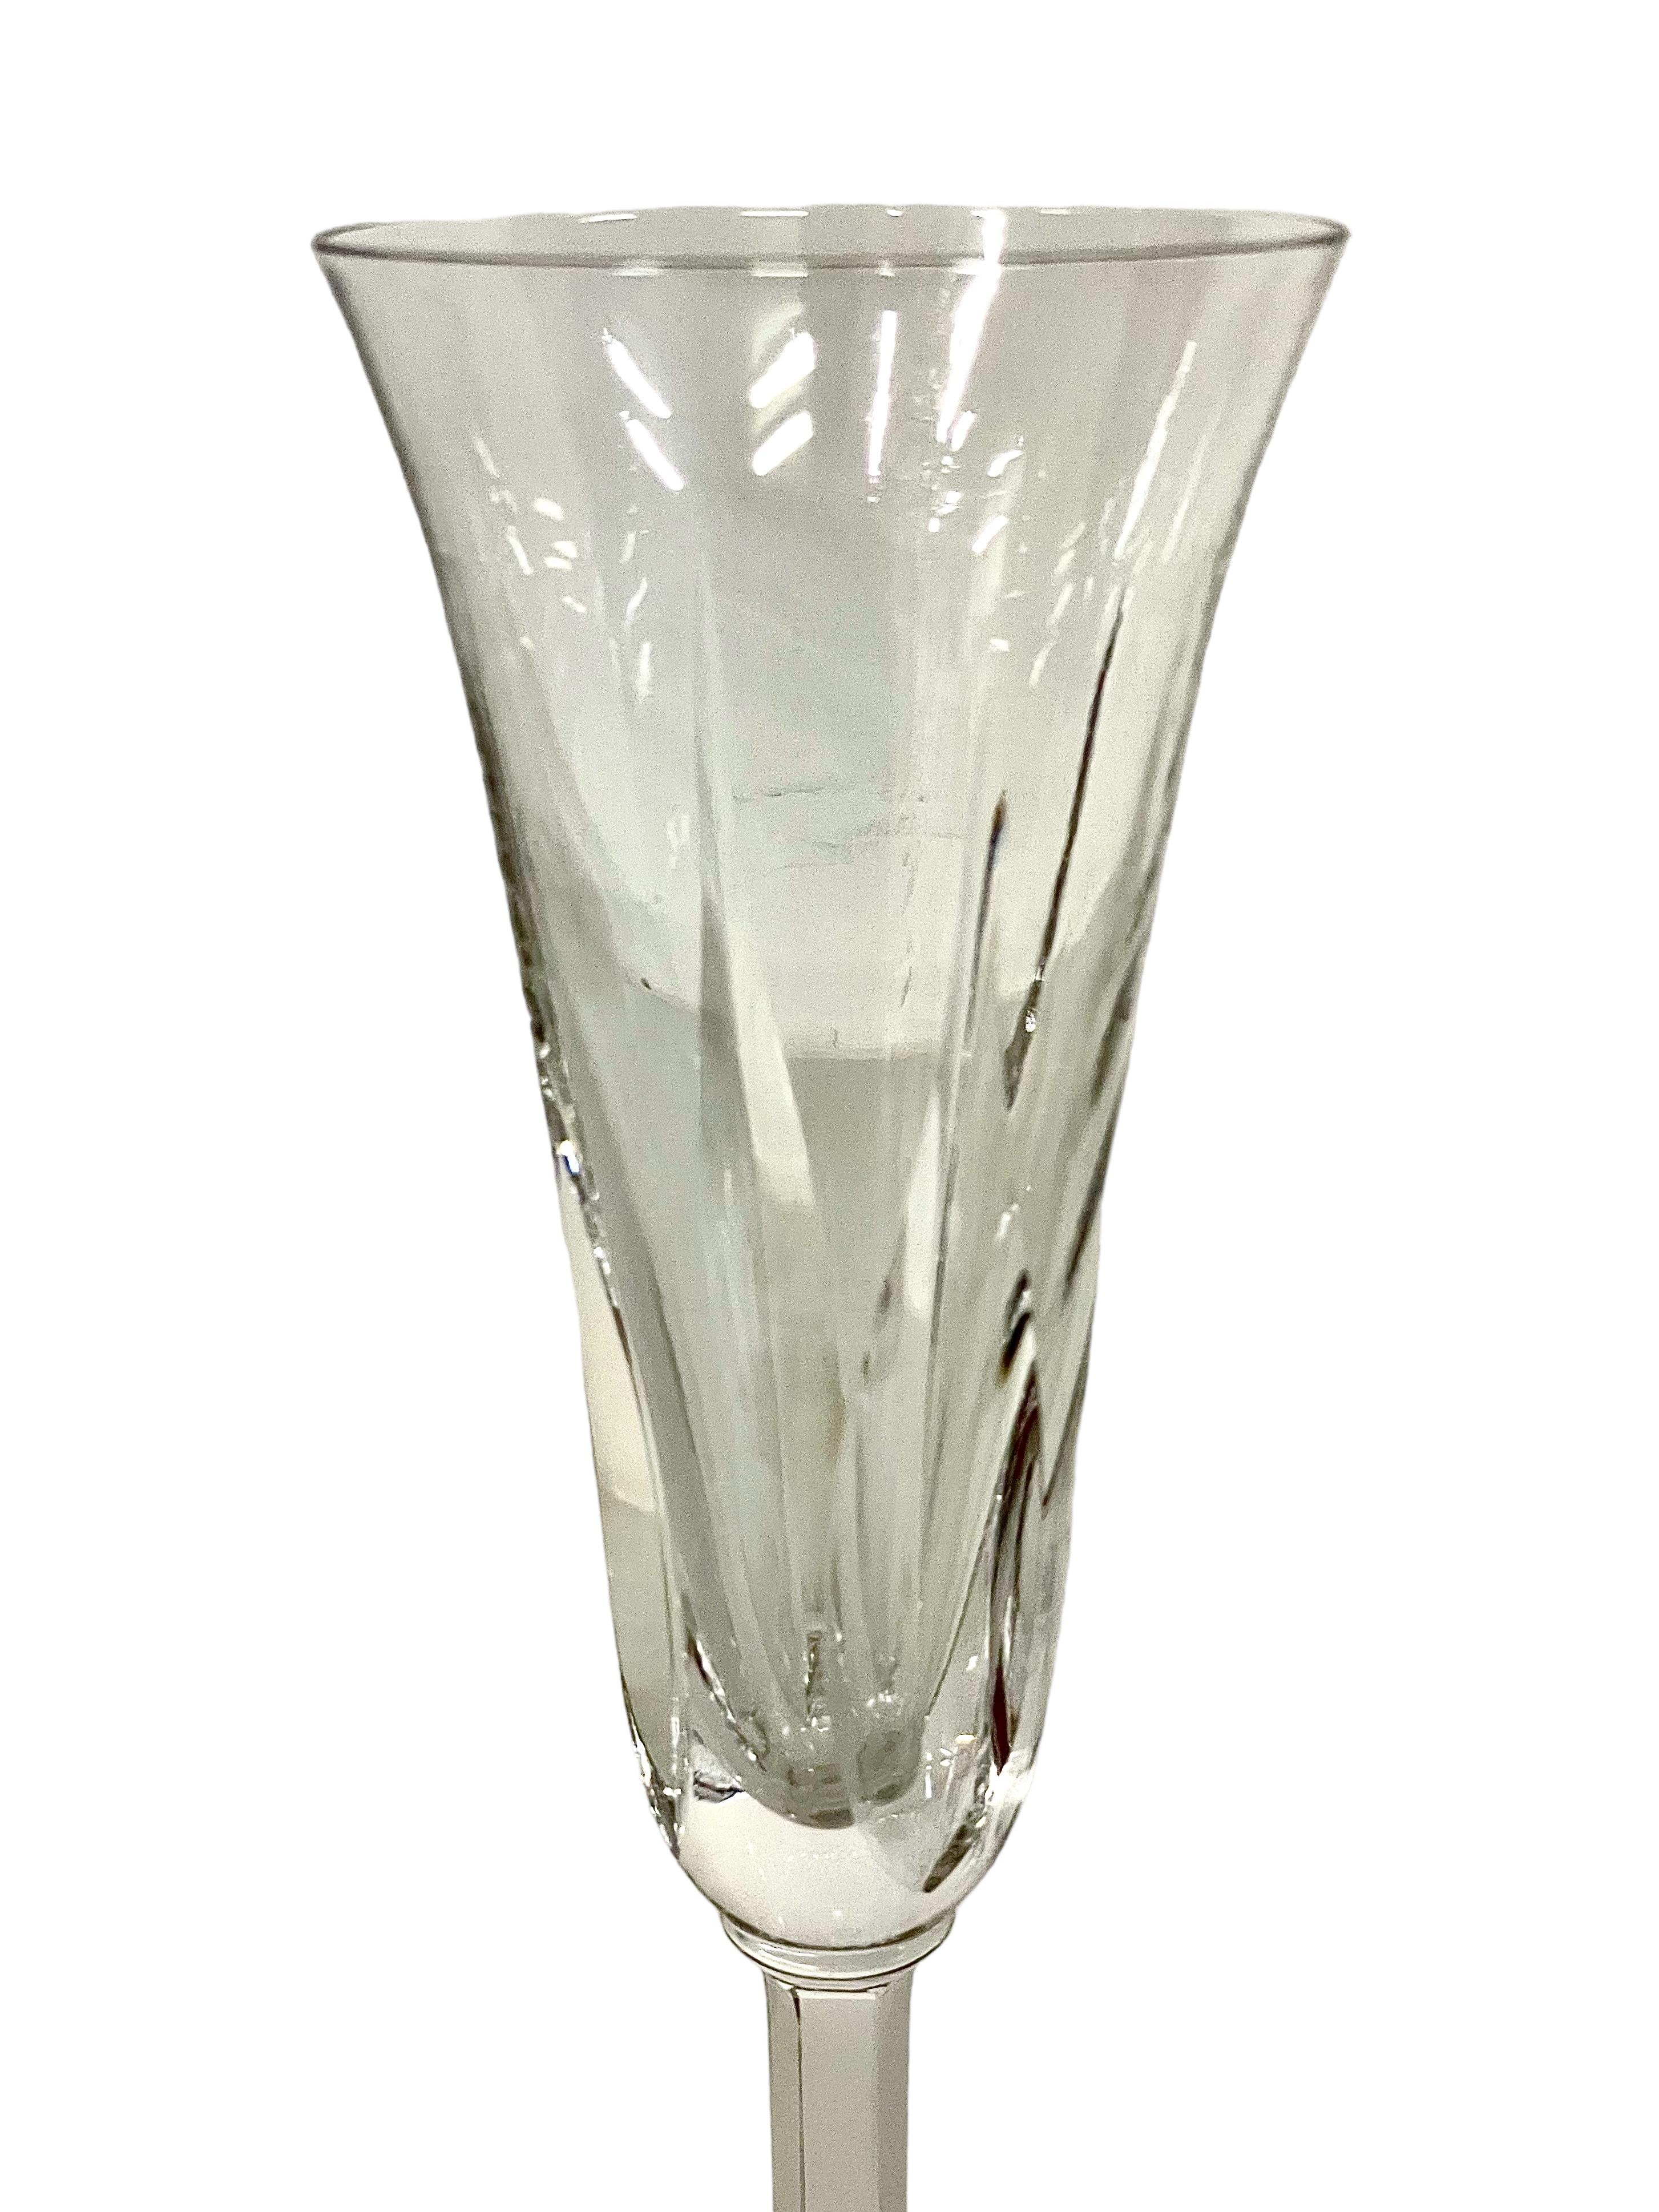 An exceptional set of eight crystal Champagne flutes in sparkling Saint-Louis crystal. The tulip- shaped chalice of each is cut with tall and pointed lozenges, while the stem features elegantly cut flat ribs. The glasses are all stamped